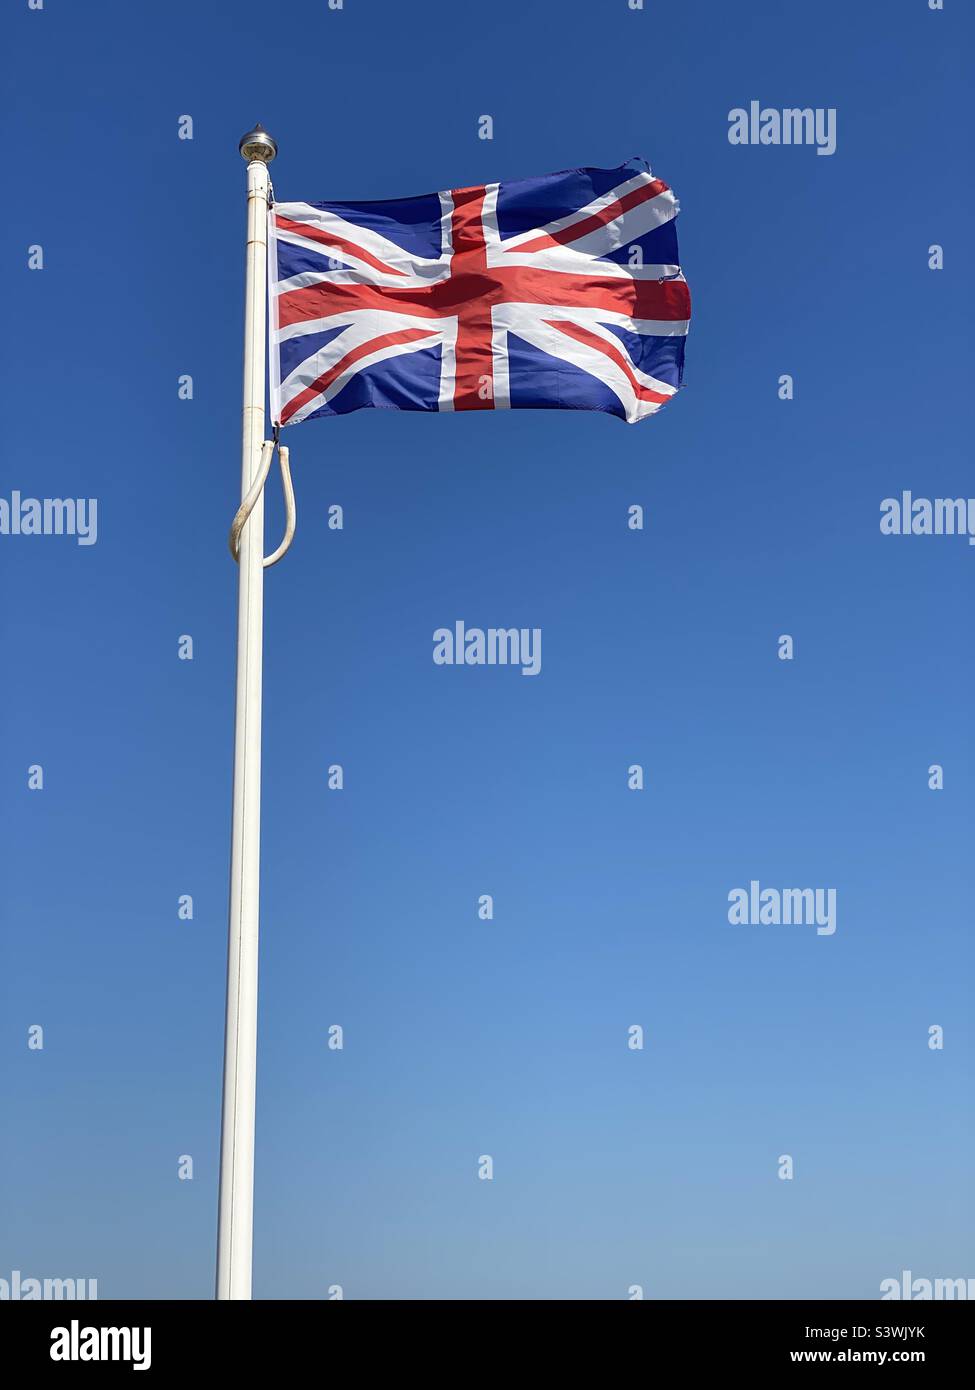 The Union Jack - flag of The United Kingdom, Great Britain & Northern Ireland, flutters in a sunny blue sky. This flag can be seen in England, Scotland, Wales & N.I. Photo ©️ COLIN HOSKINS. Stock Photo